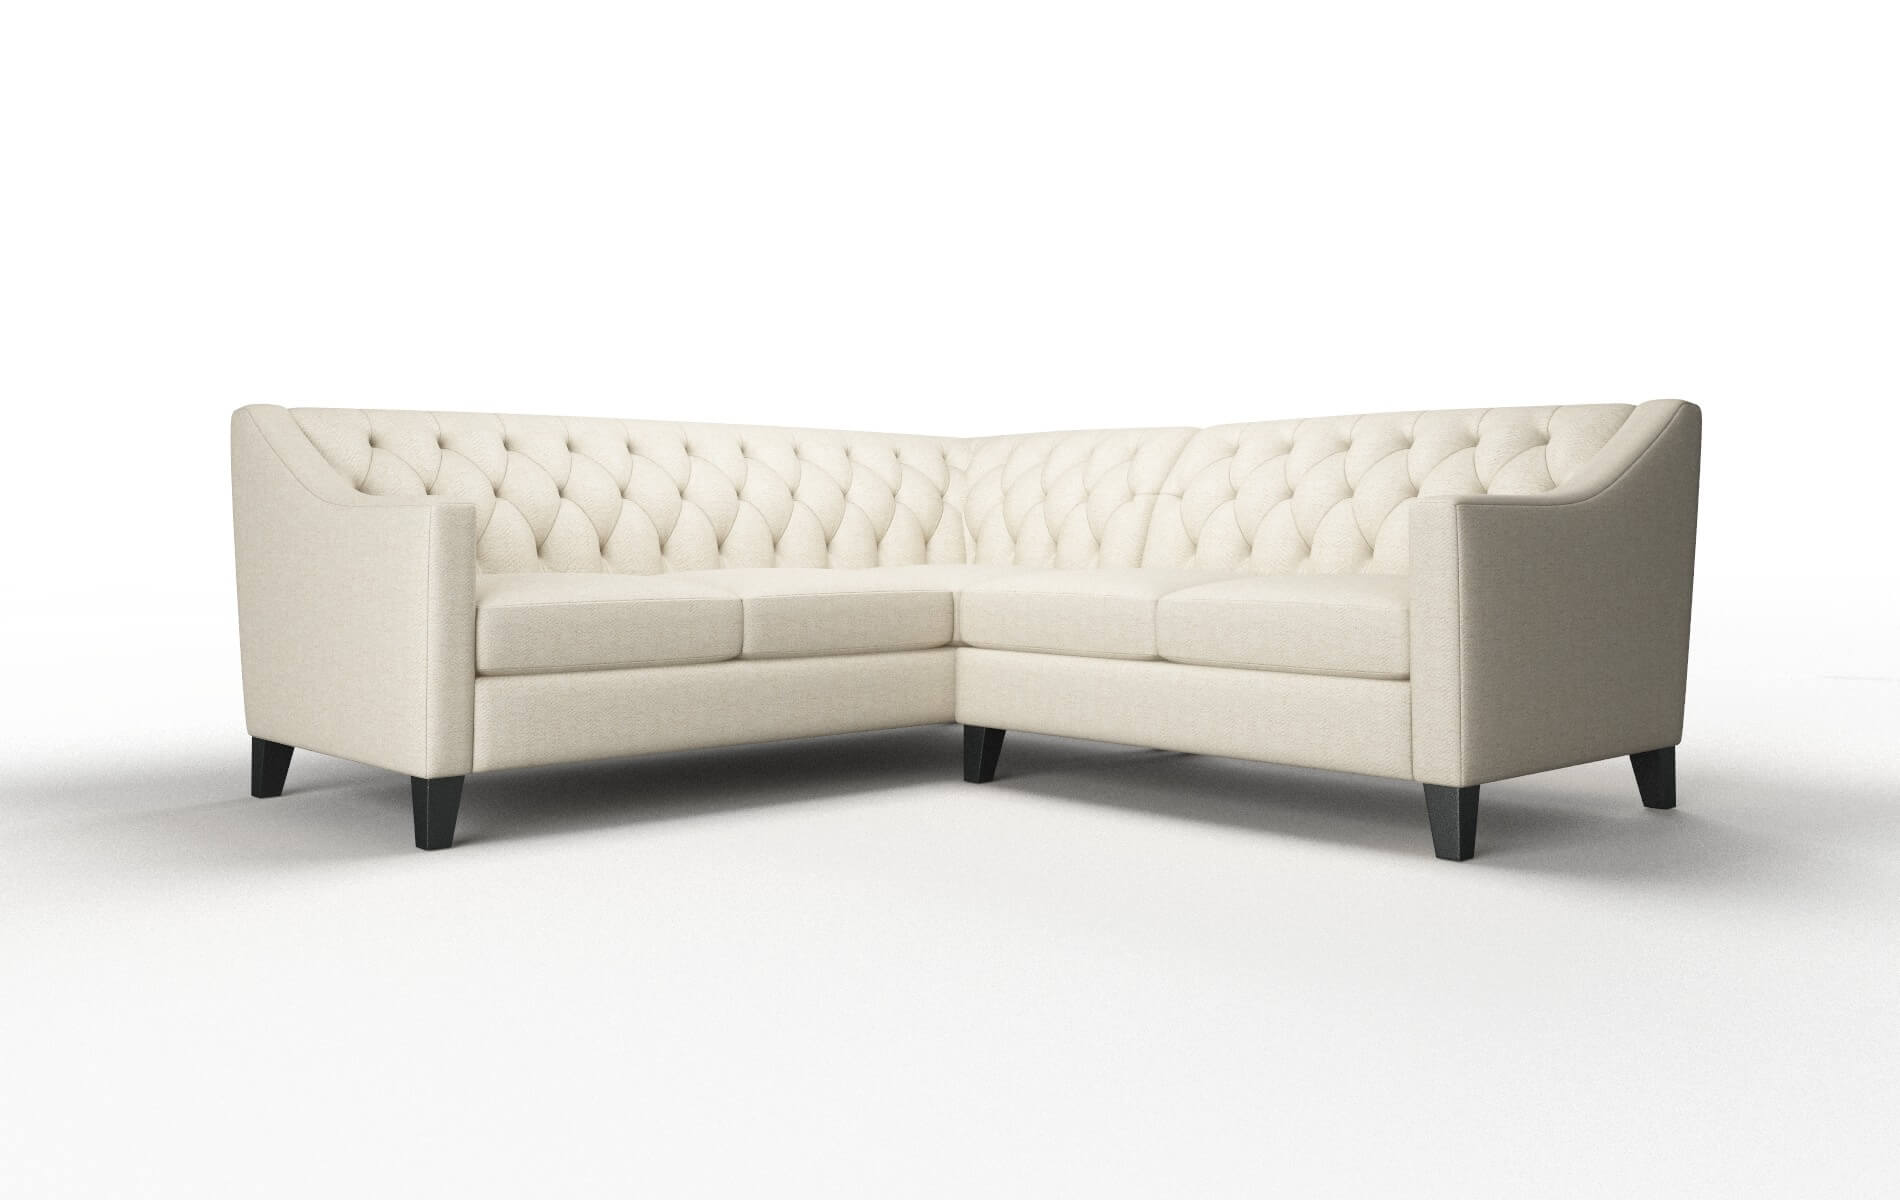 Seville Catalina Wheat Sectional espresso legs